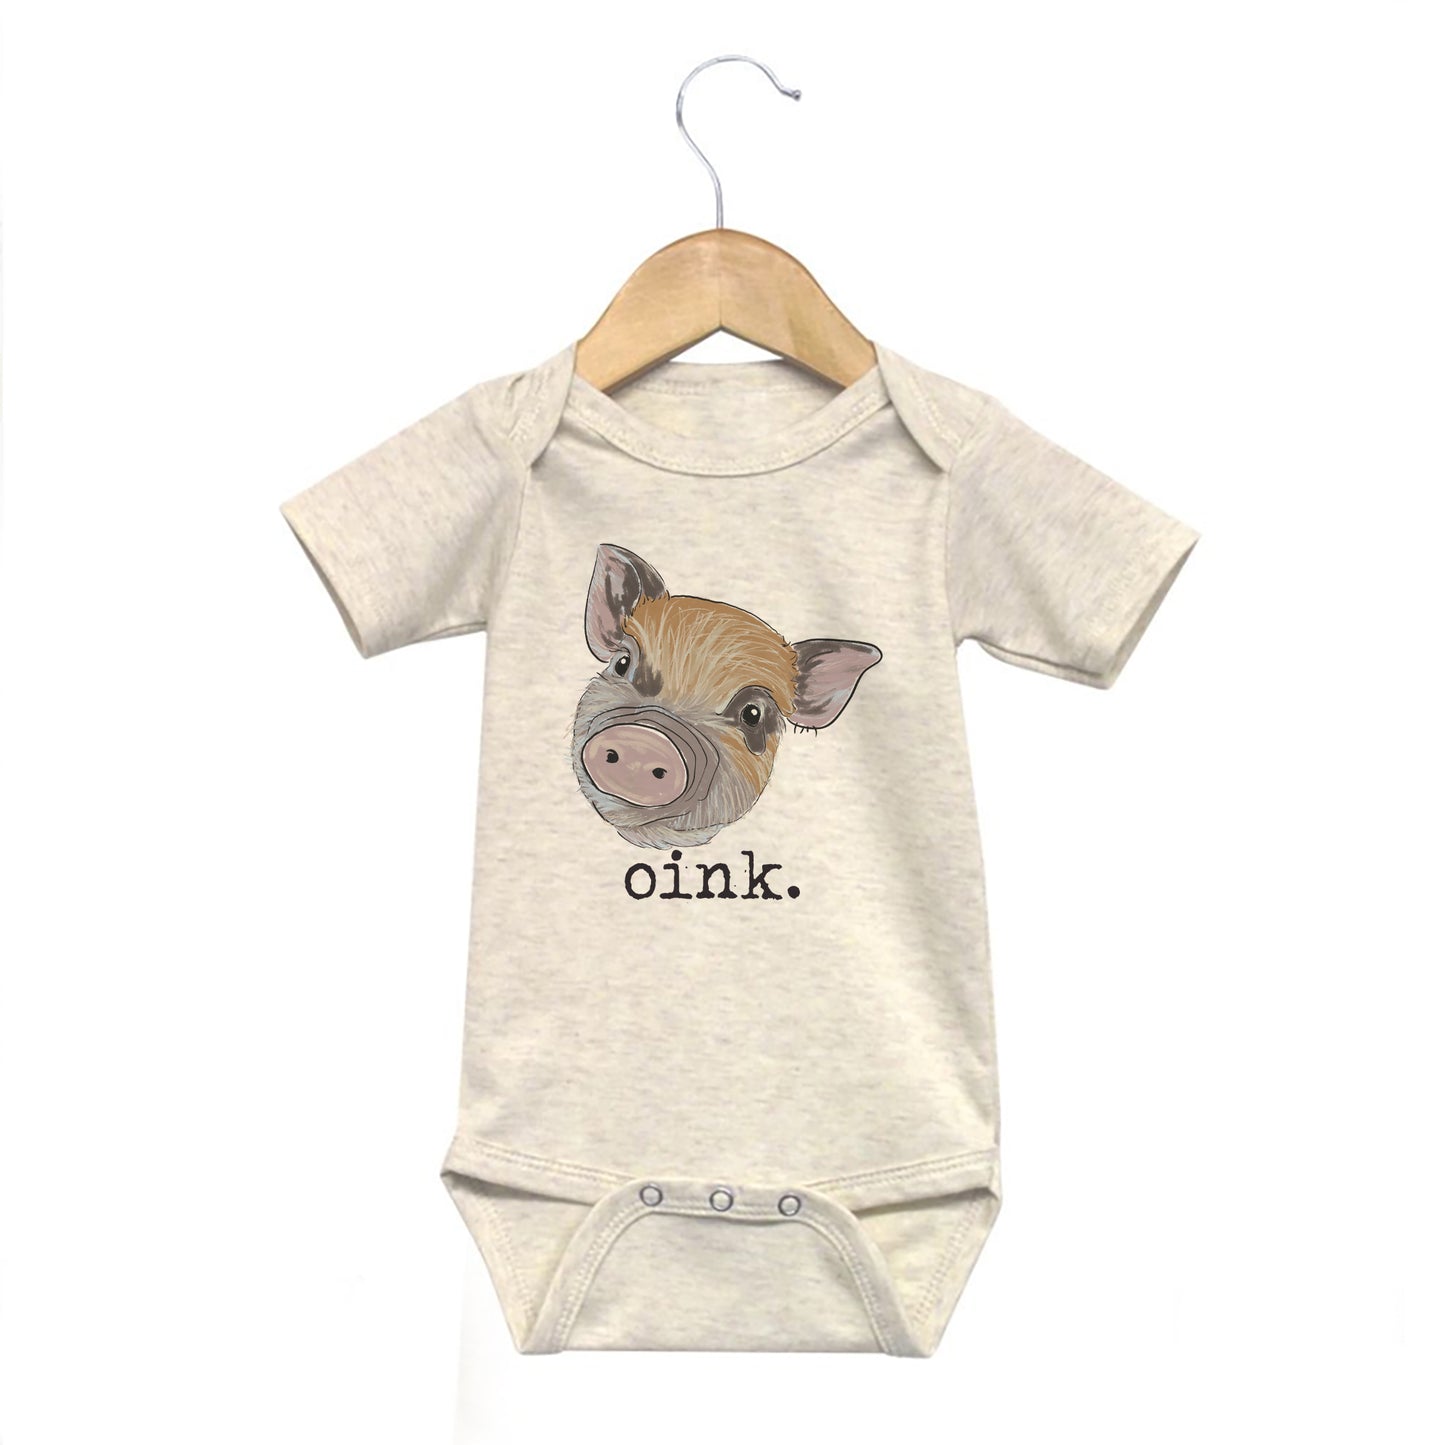 "Oink" Pig Baby Body Suit